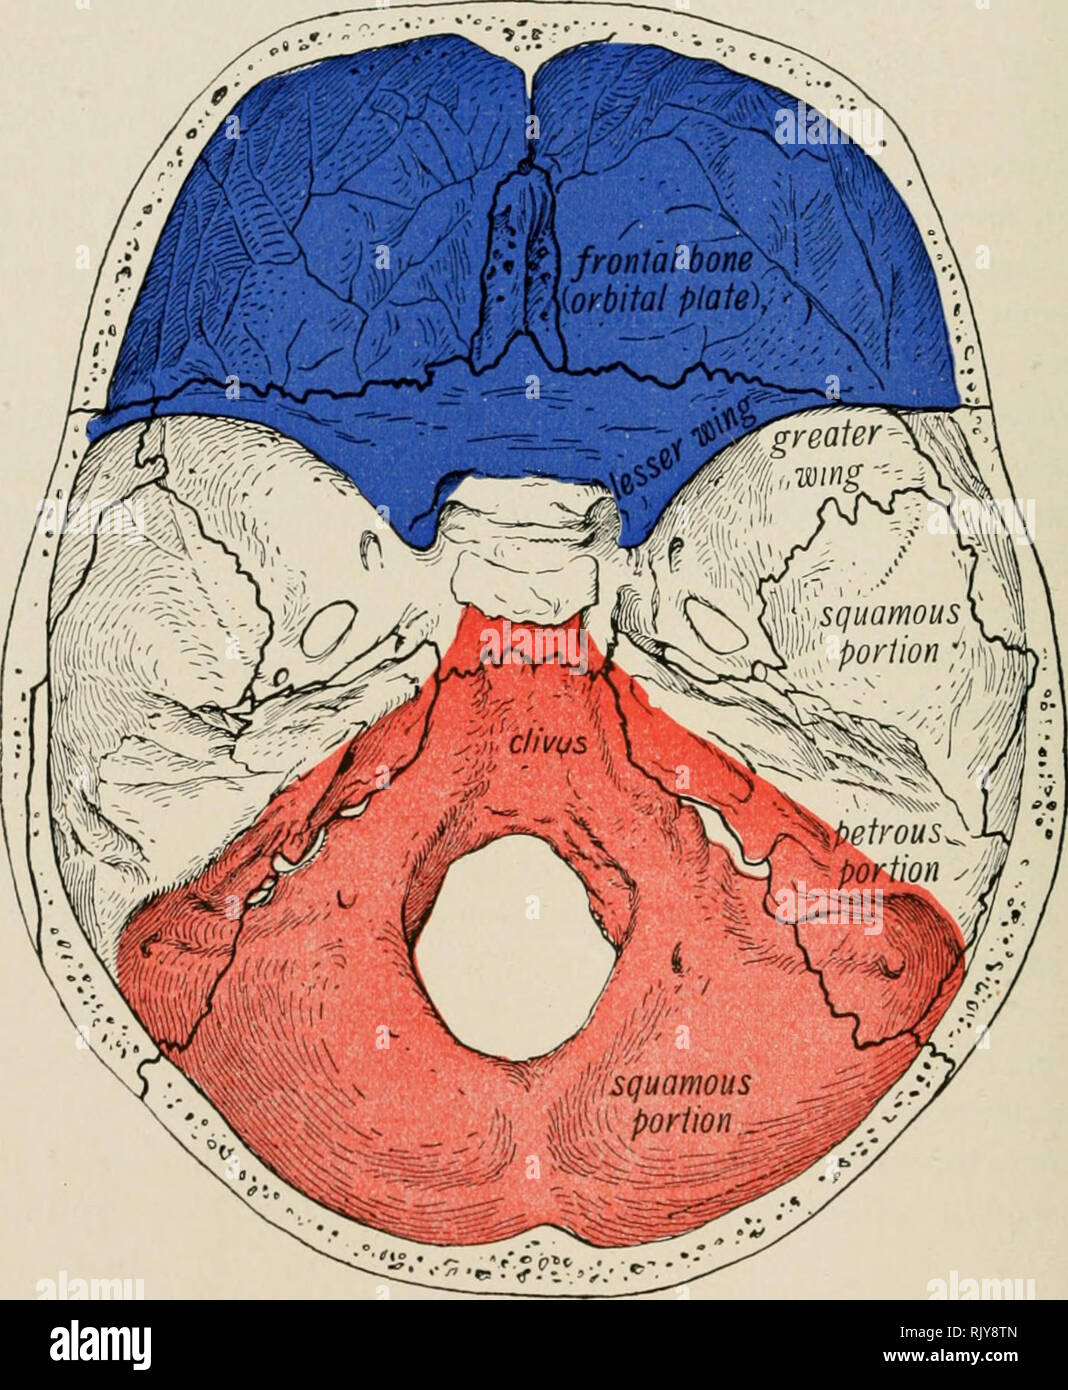 . Atlas and text-book of human anatomy. Anatomy -- Atlases. 42 ATLAS AND TEXT-BOOK OF HUMAN ANATOMY. To the outer side of the sella turcica we see the cerebral surface of the greater wing of the sphenoid bone, which is separated from the o^•erlying lesser wing of the sphenoid by the superior orbital or sphenoidal fissure. The remaining boundaries of this surface are the same as those seen on the external surface of the base of the skull, namely, the sphenoparietal and spheno- squamosal sutures, the foramen lacerum or sphenopetrosal fissure. Near its origin from the body, the greater wing of th Stock Photo